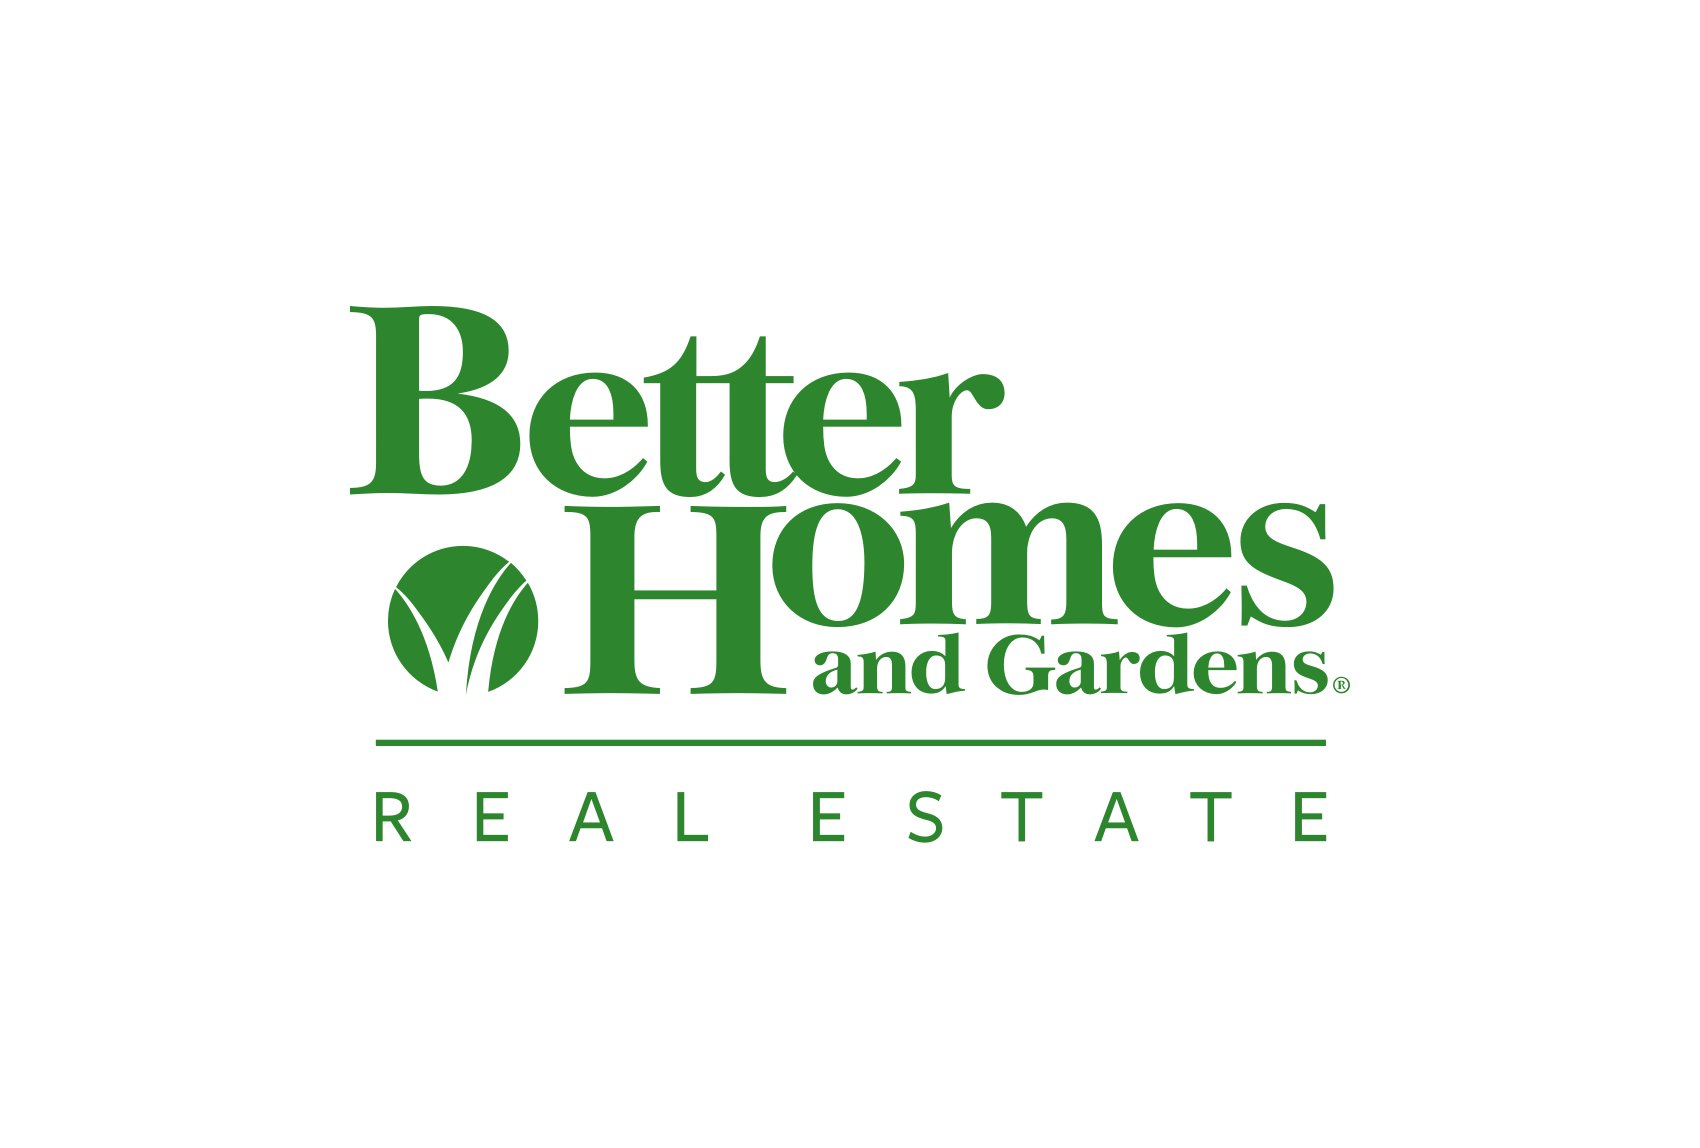 Free Real Estate Logo Maker & Top Ideas for Property Businesses